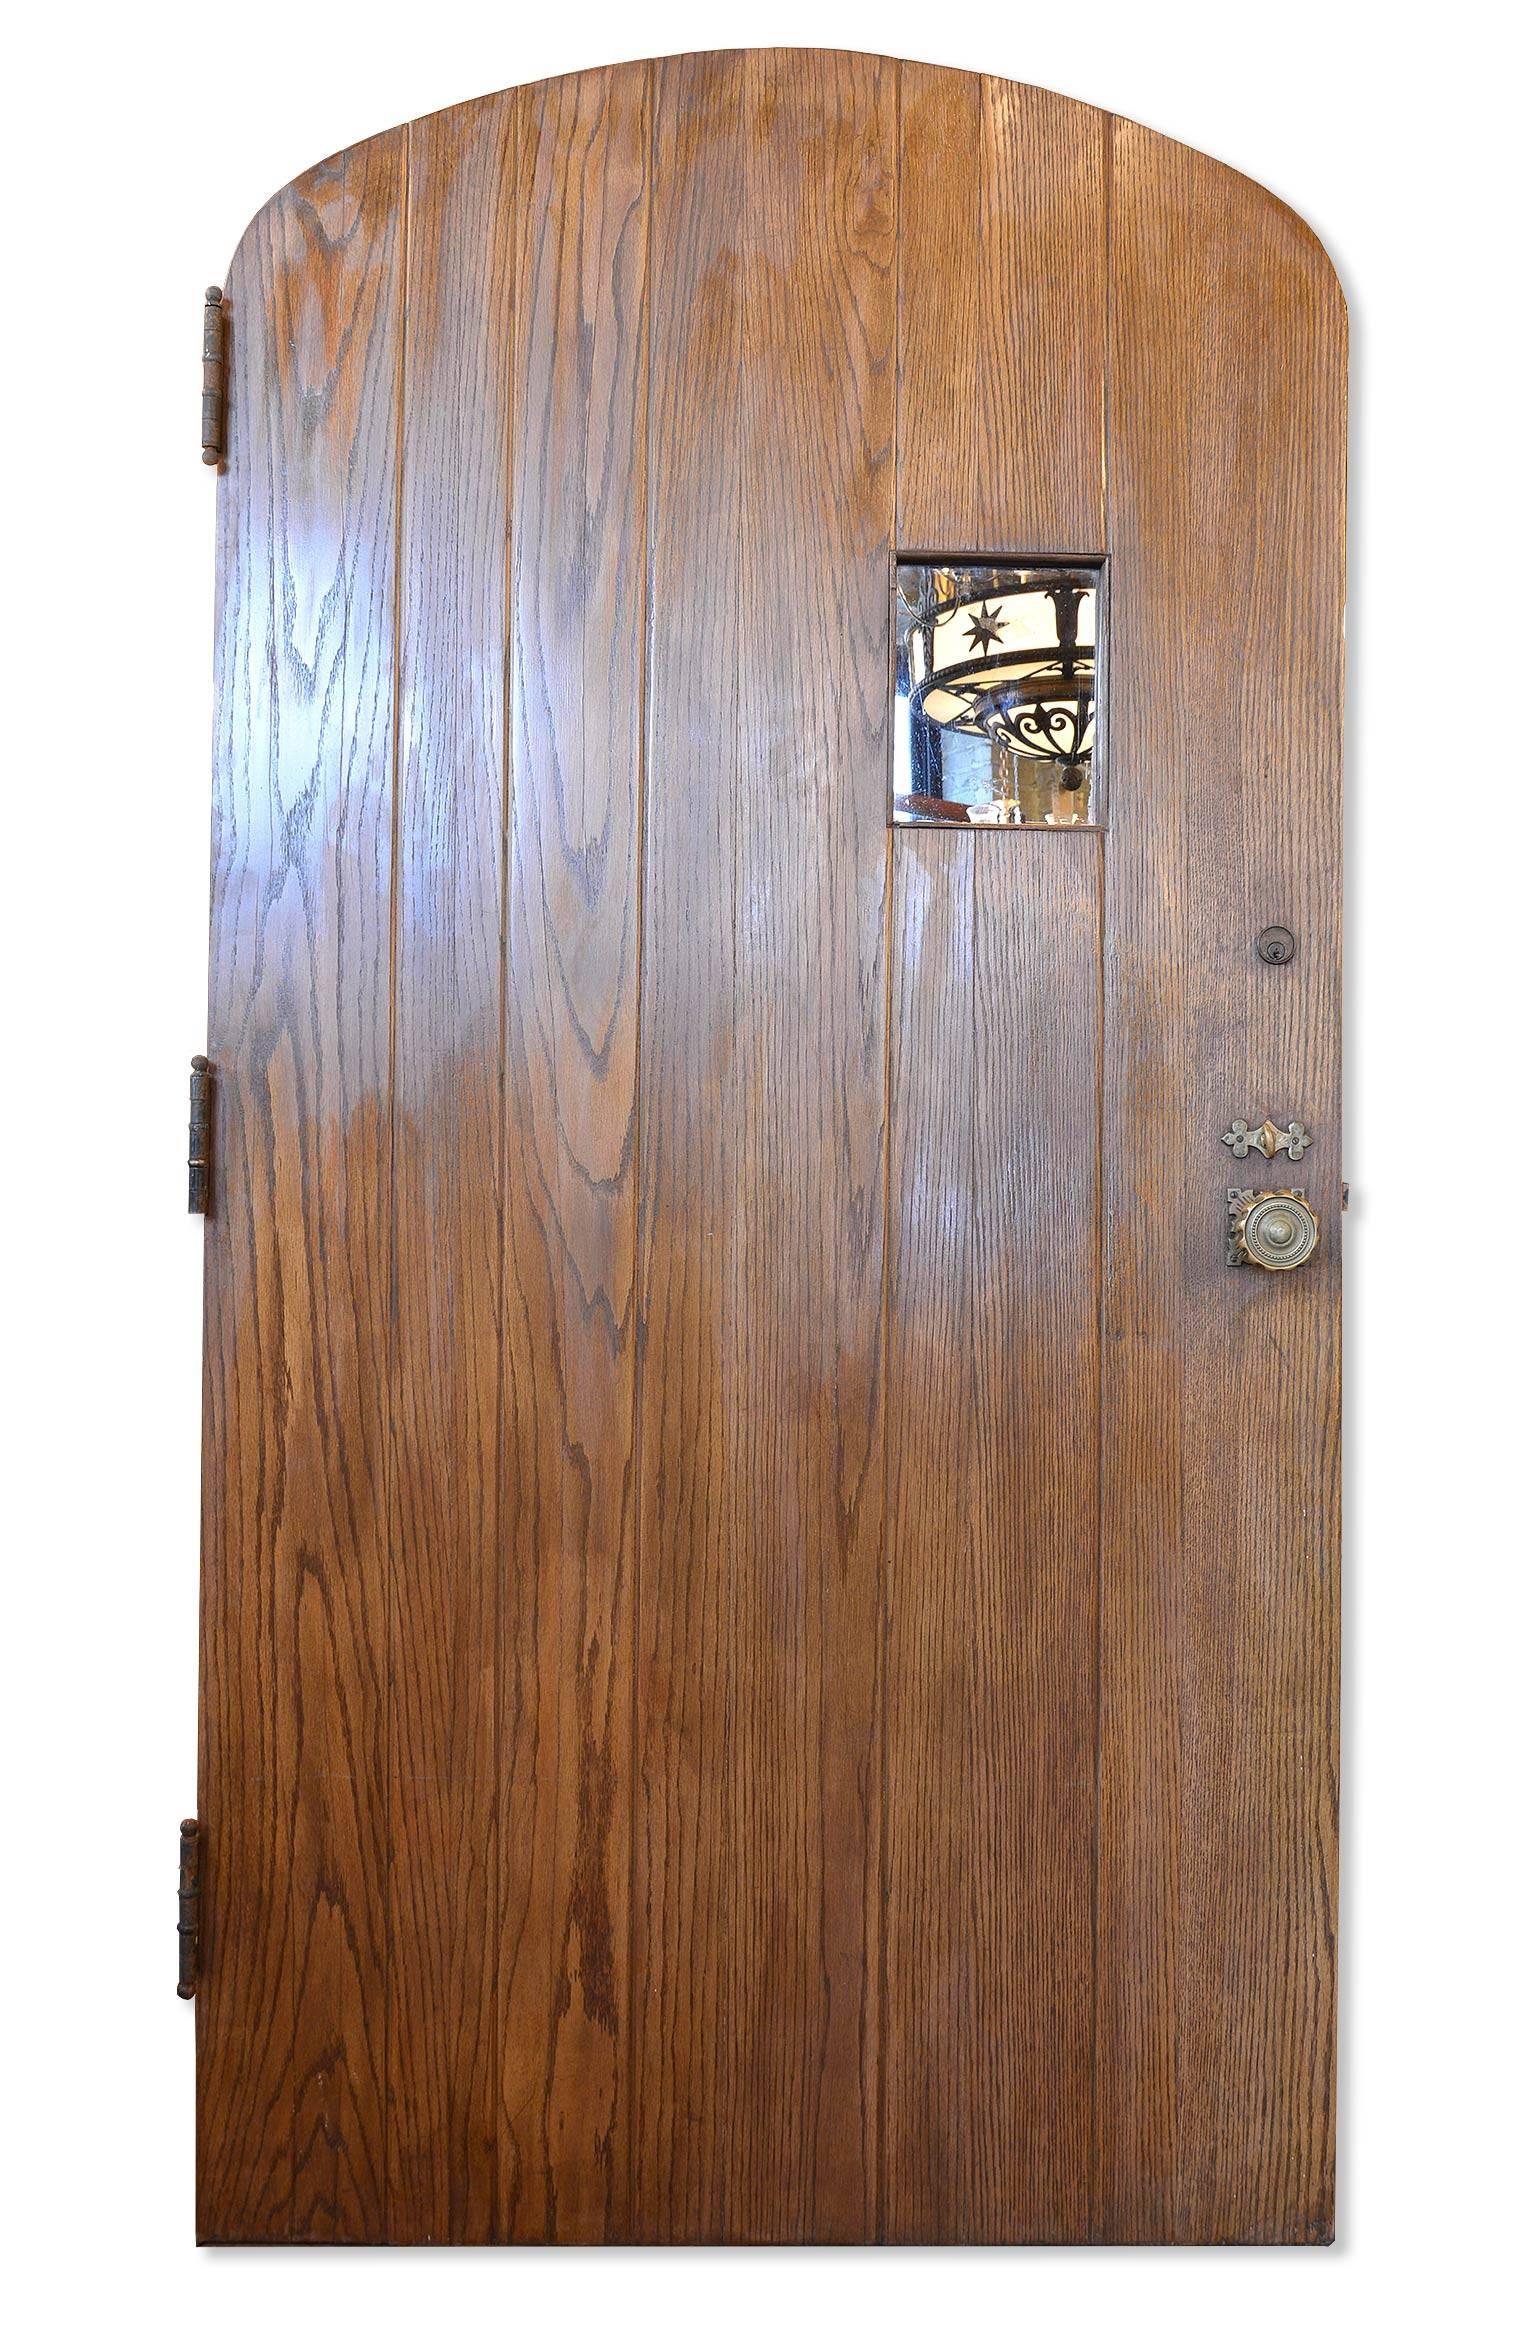 Rescued from a 1920s home outside of Chicago, this wonderful oak entry door features a rich original wood finish and amazing cast brass/nickel plated strap hinges and entry knob set that is truly one of a kind.  Strap hinges are ornamental and